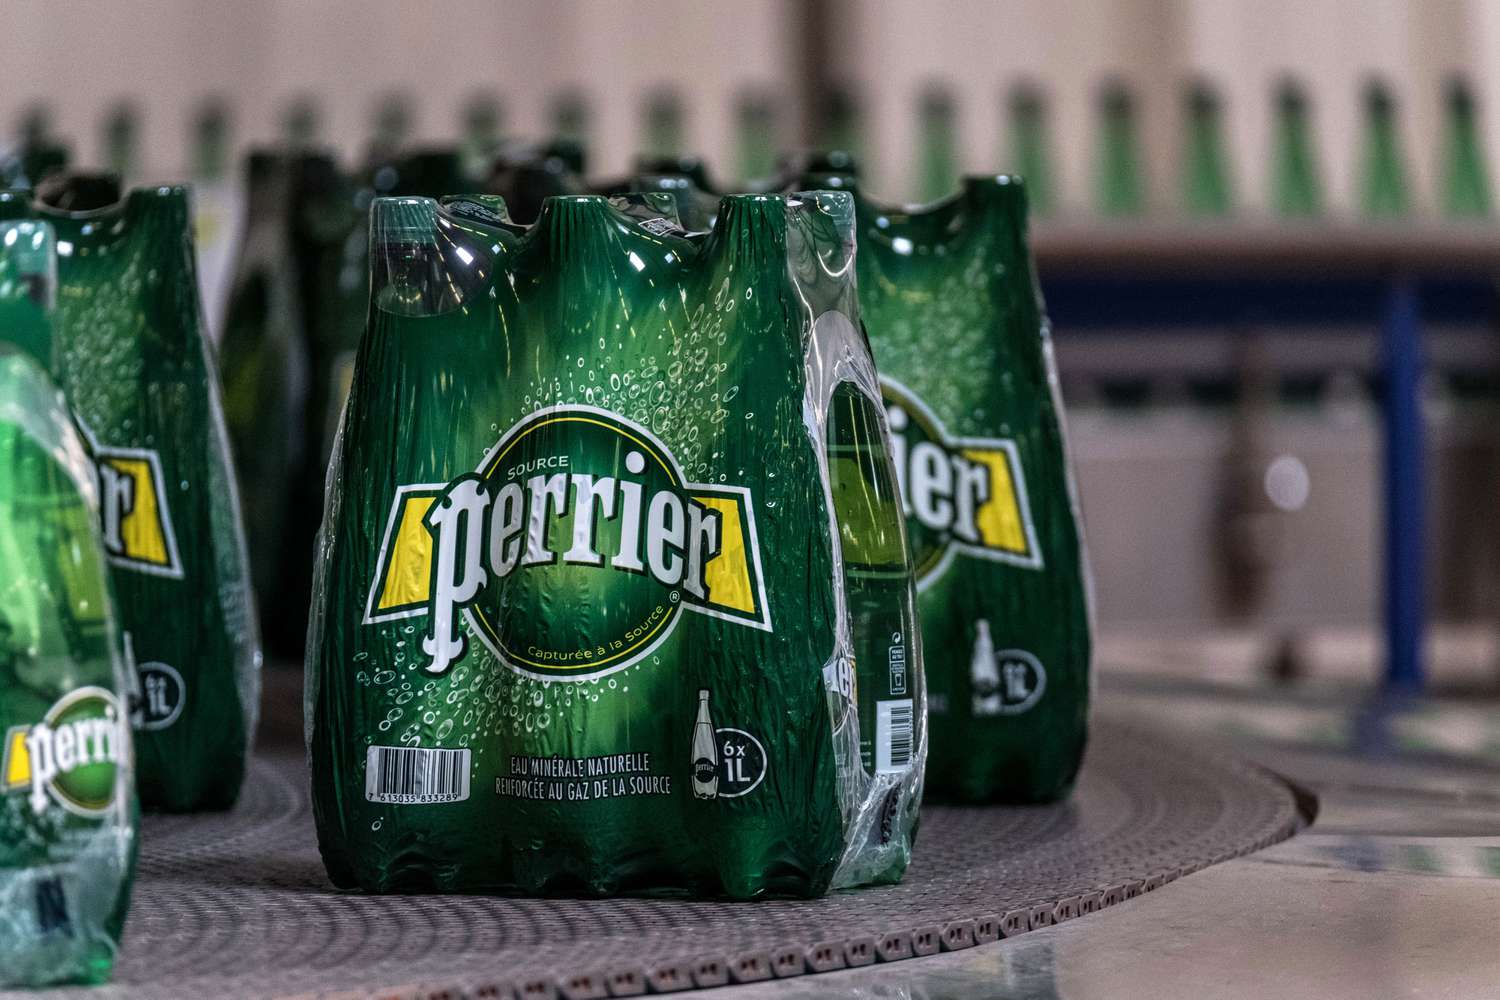 In a 5-Year Legal Dispute, Pennsylvania Court Rules Perrier Is a Soft Drink and Subject to Tax